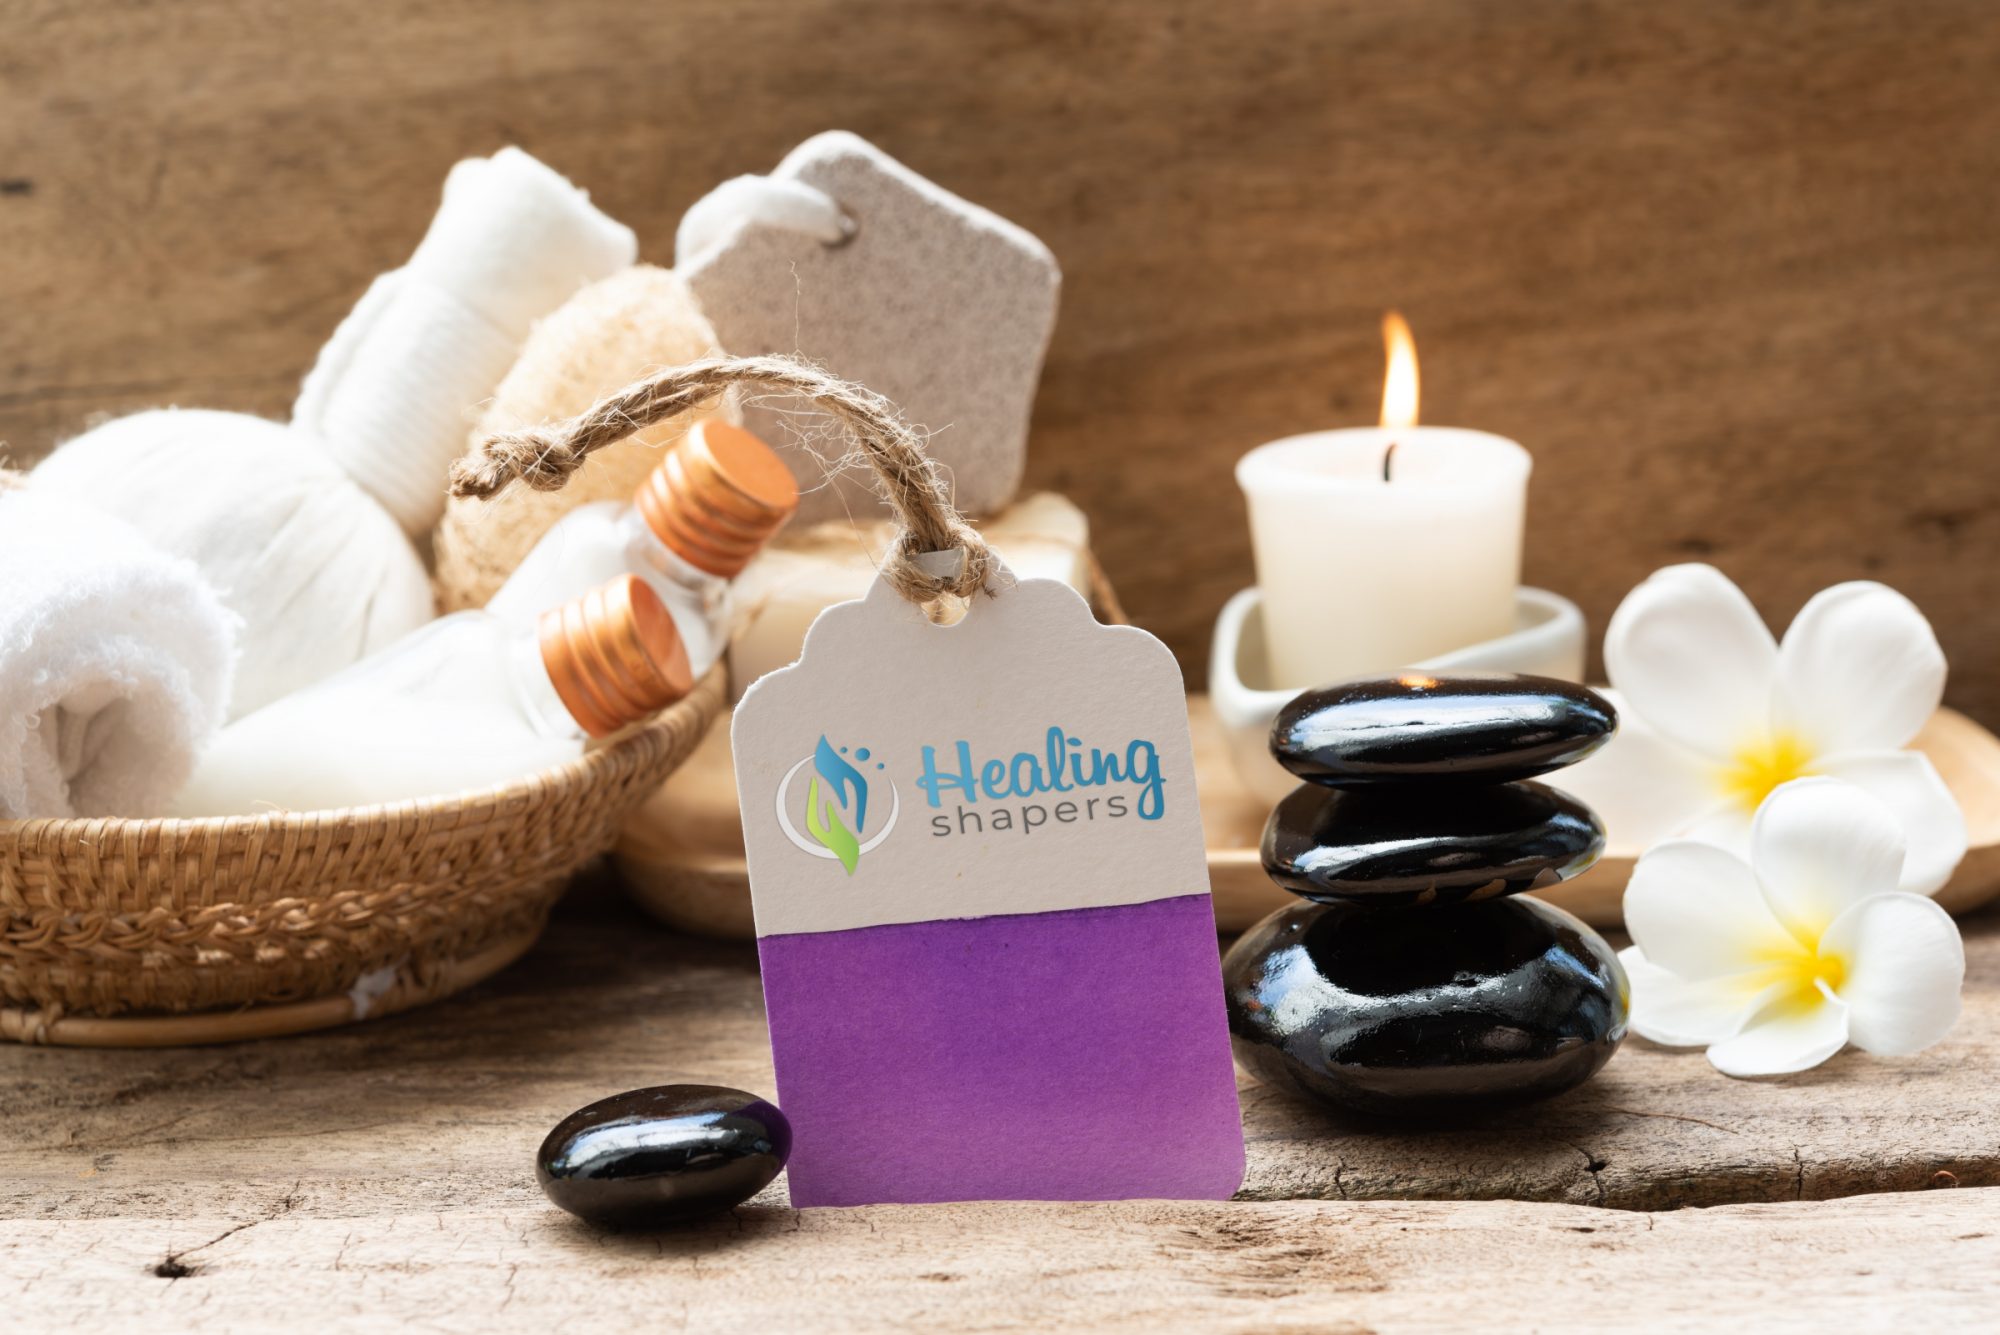 stock photo spa wellness products black zen stone with price tag branding for promotion on wood table 1279032526 2jpg